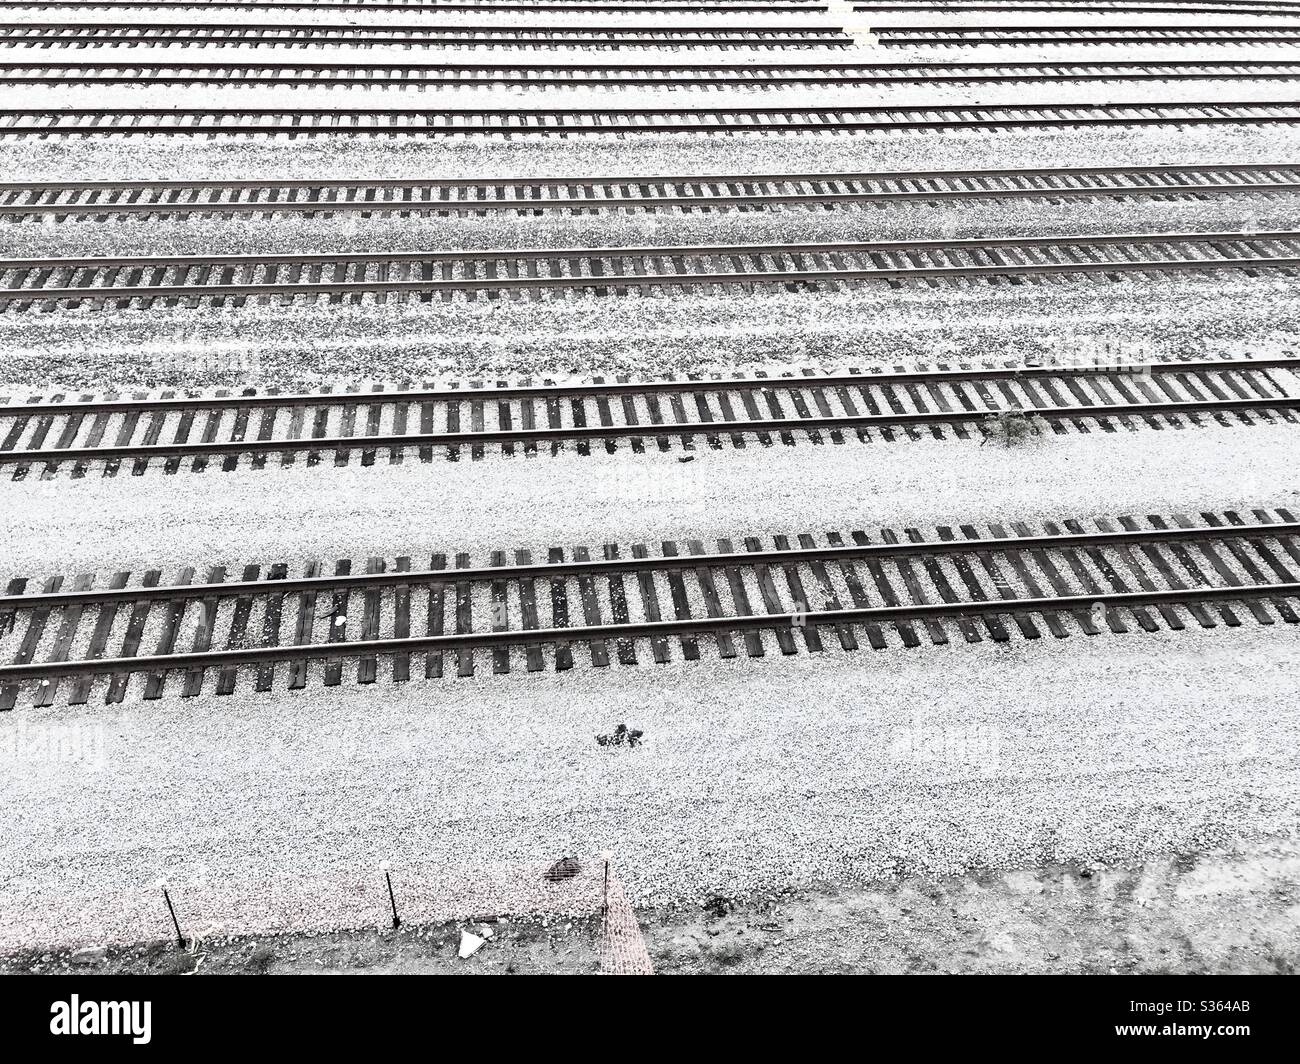 Rows of railroad tracks in black and white, patterns, lines. Rails, railroad ties on gravel. Stock Photo